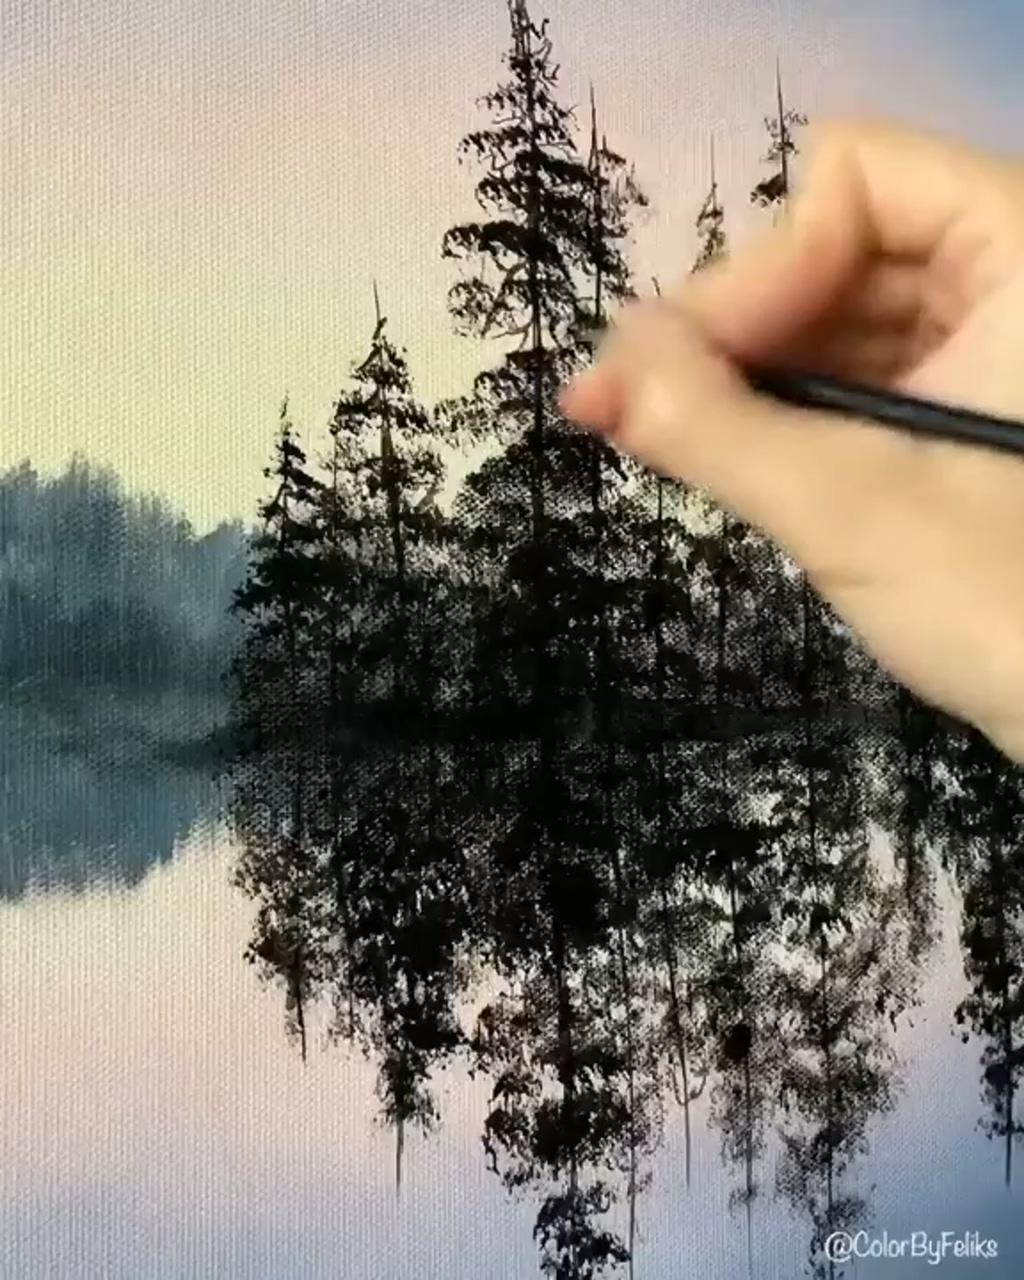 Painting water reflections using acrylics; acrylic painting inspiration